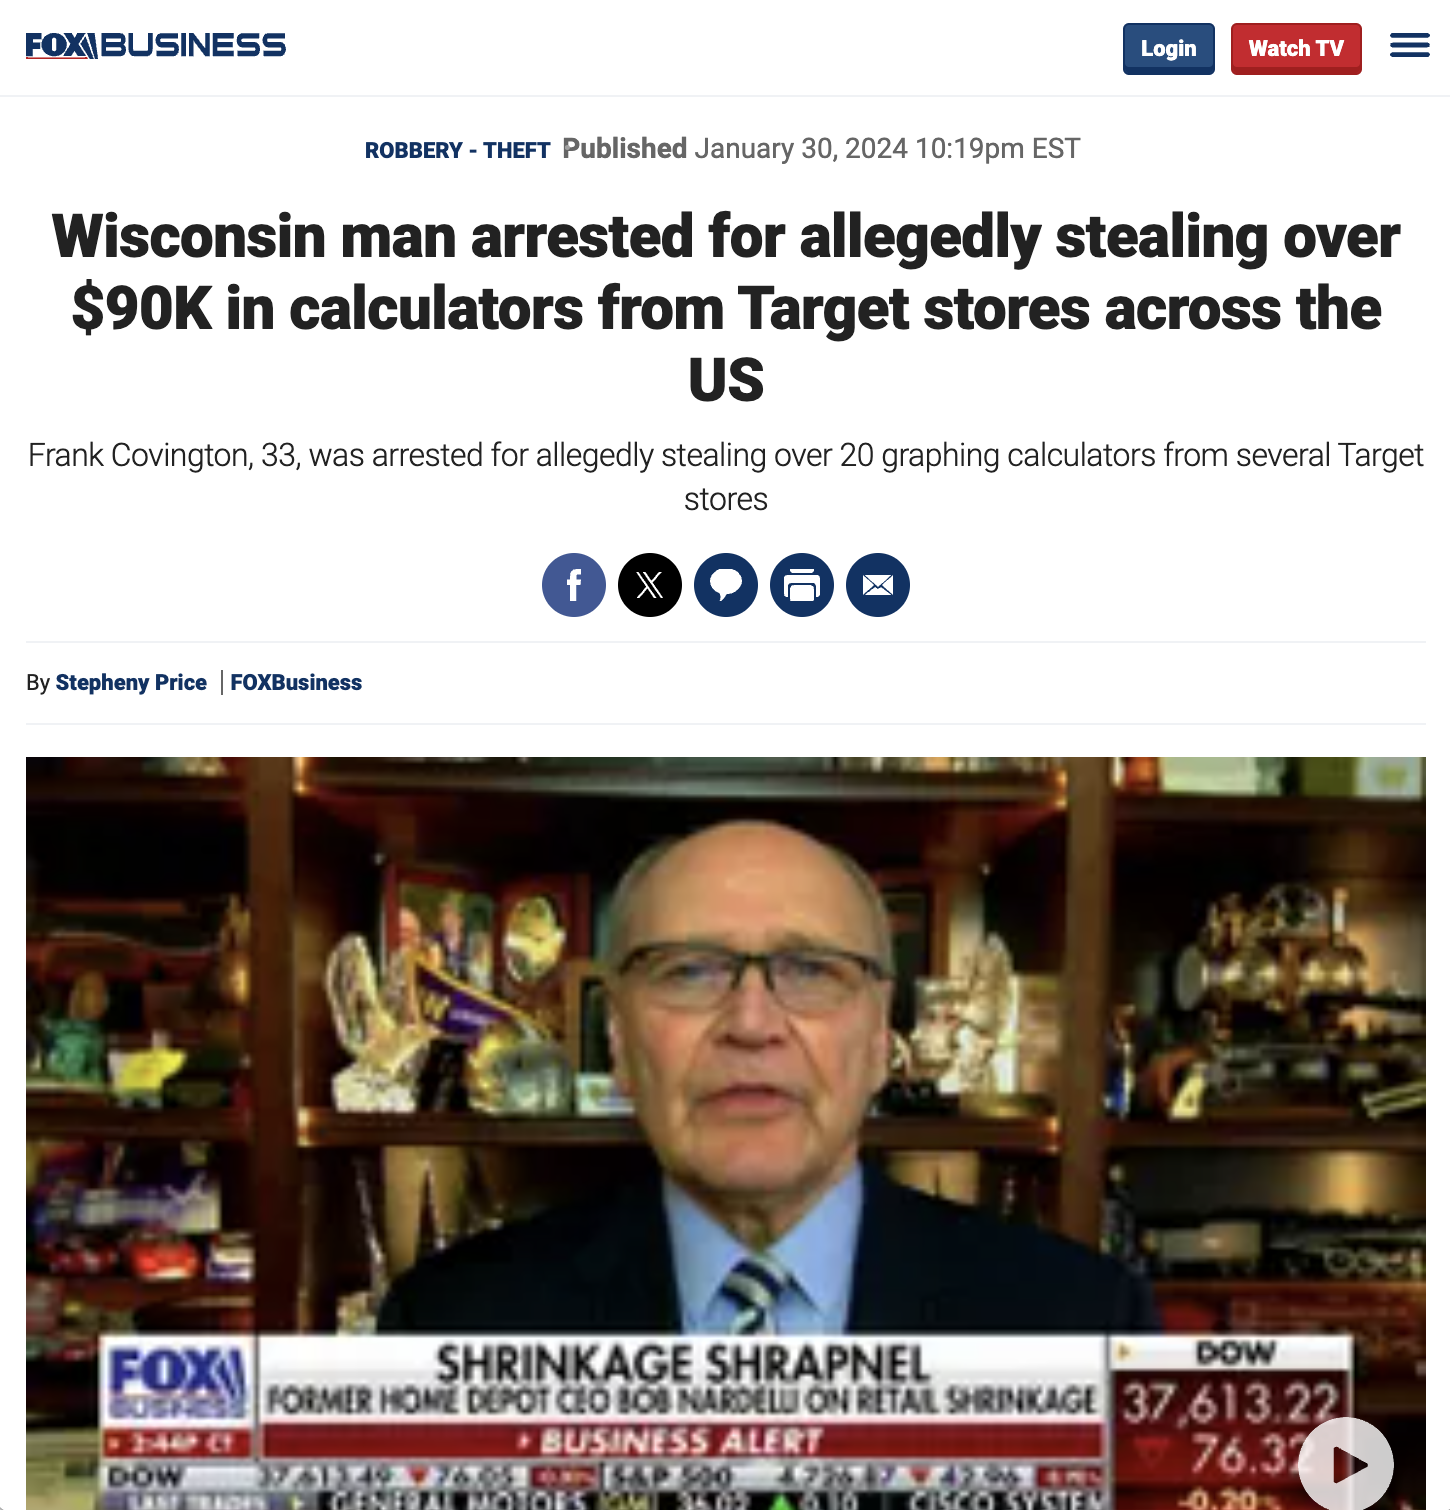 screenshot - Foxbusiness Login Watch Tv Robbery Theft Published pm Est Wisconsin man arrested for allegedly stealing over $90K in calculators from Target stores across the Us Frank Covington, 33, was arrested for allegedly stealing over 20 graphing calcul